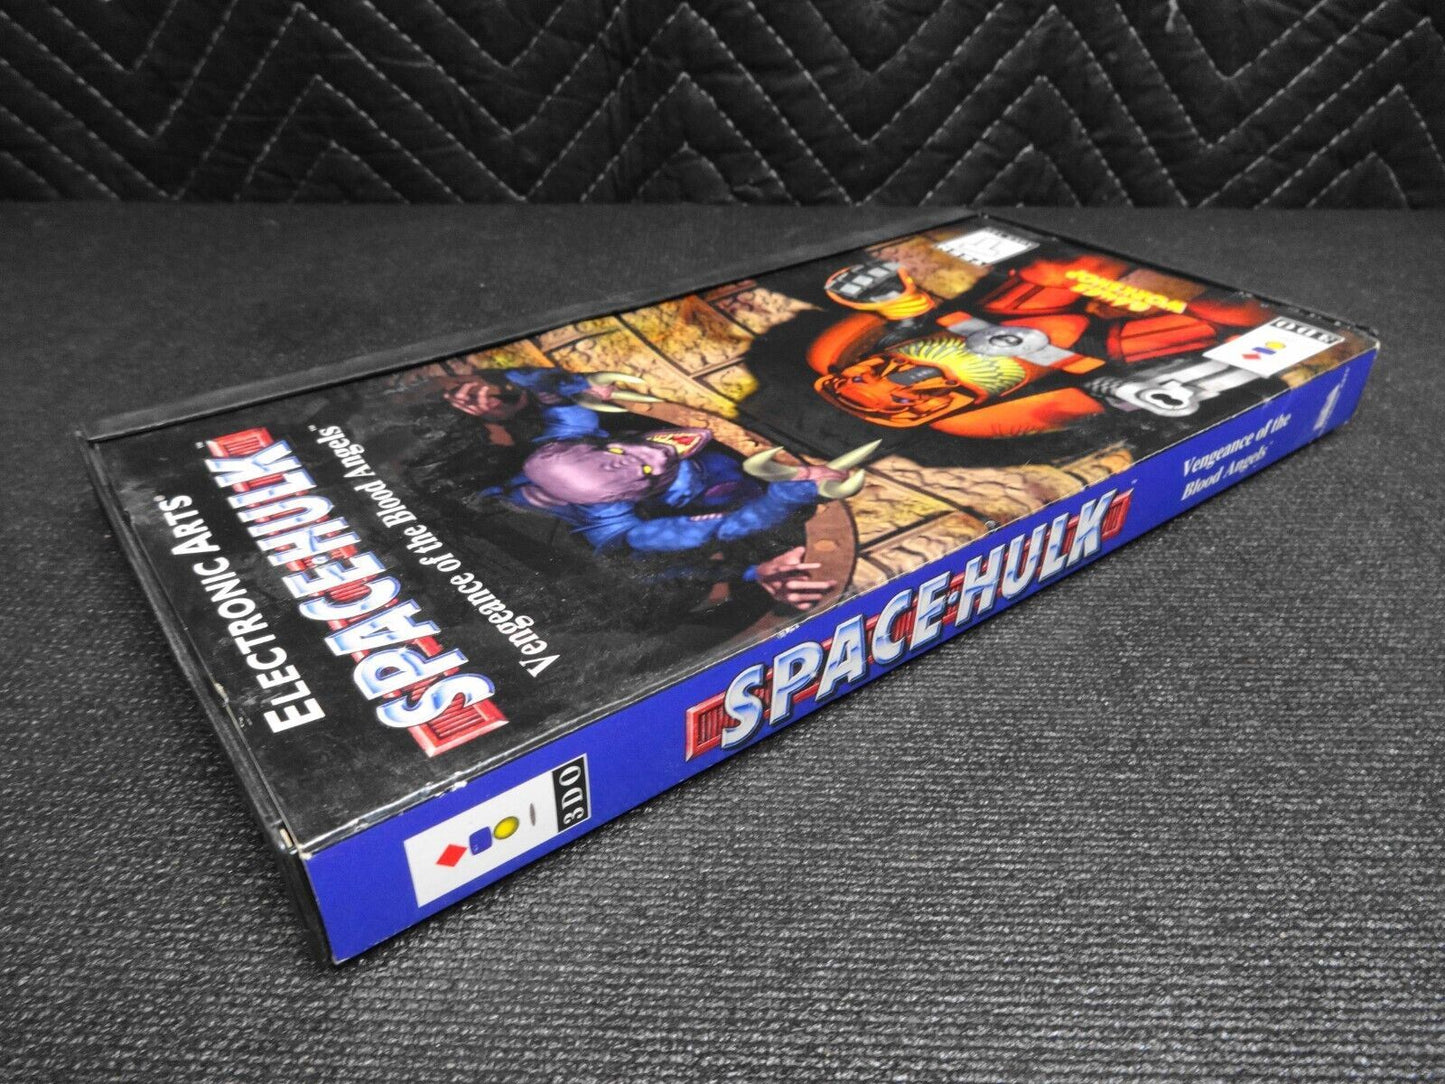 Space Hulk: Vengeance of the Blood Angels (3DO, 1995) in Long Box